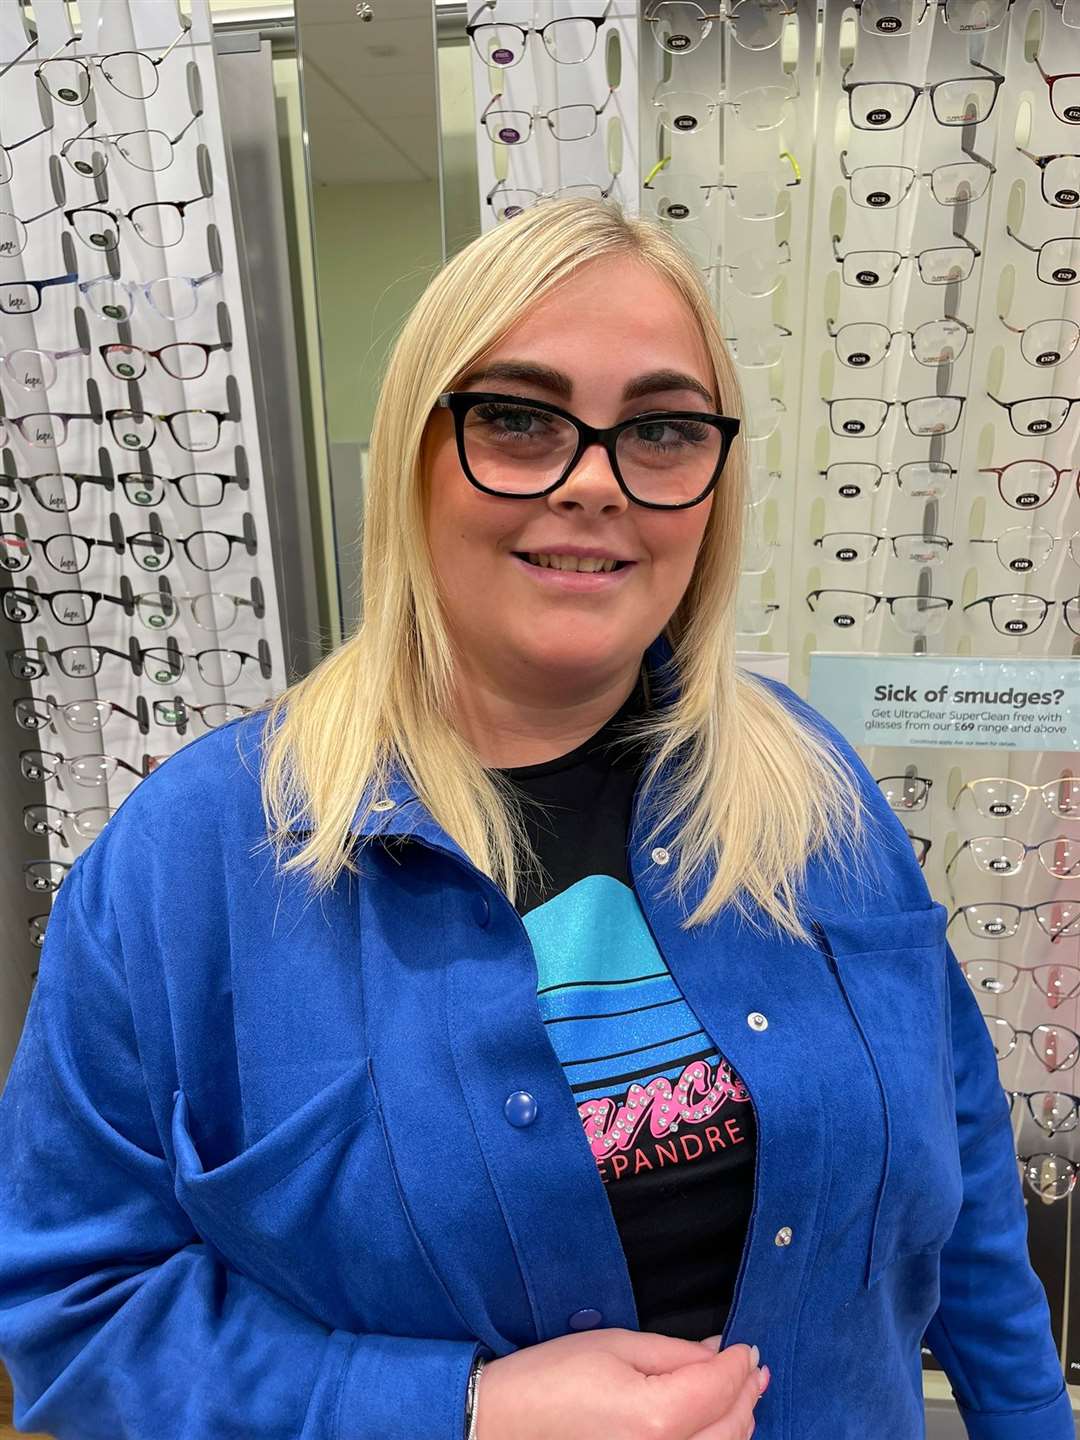 Carly Stewart is aiming to raise awareness of the importance of eye examinations (Specsavers/PA)